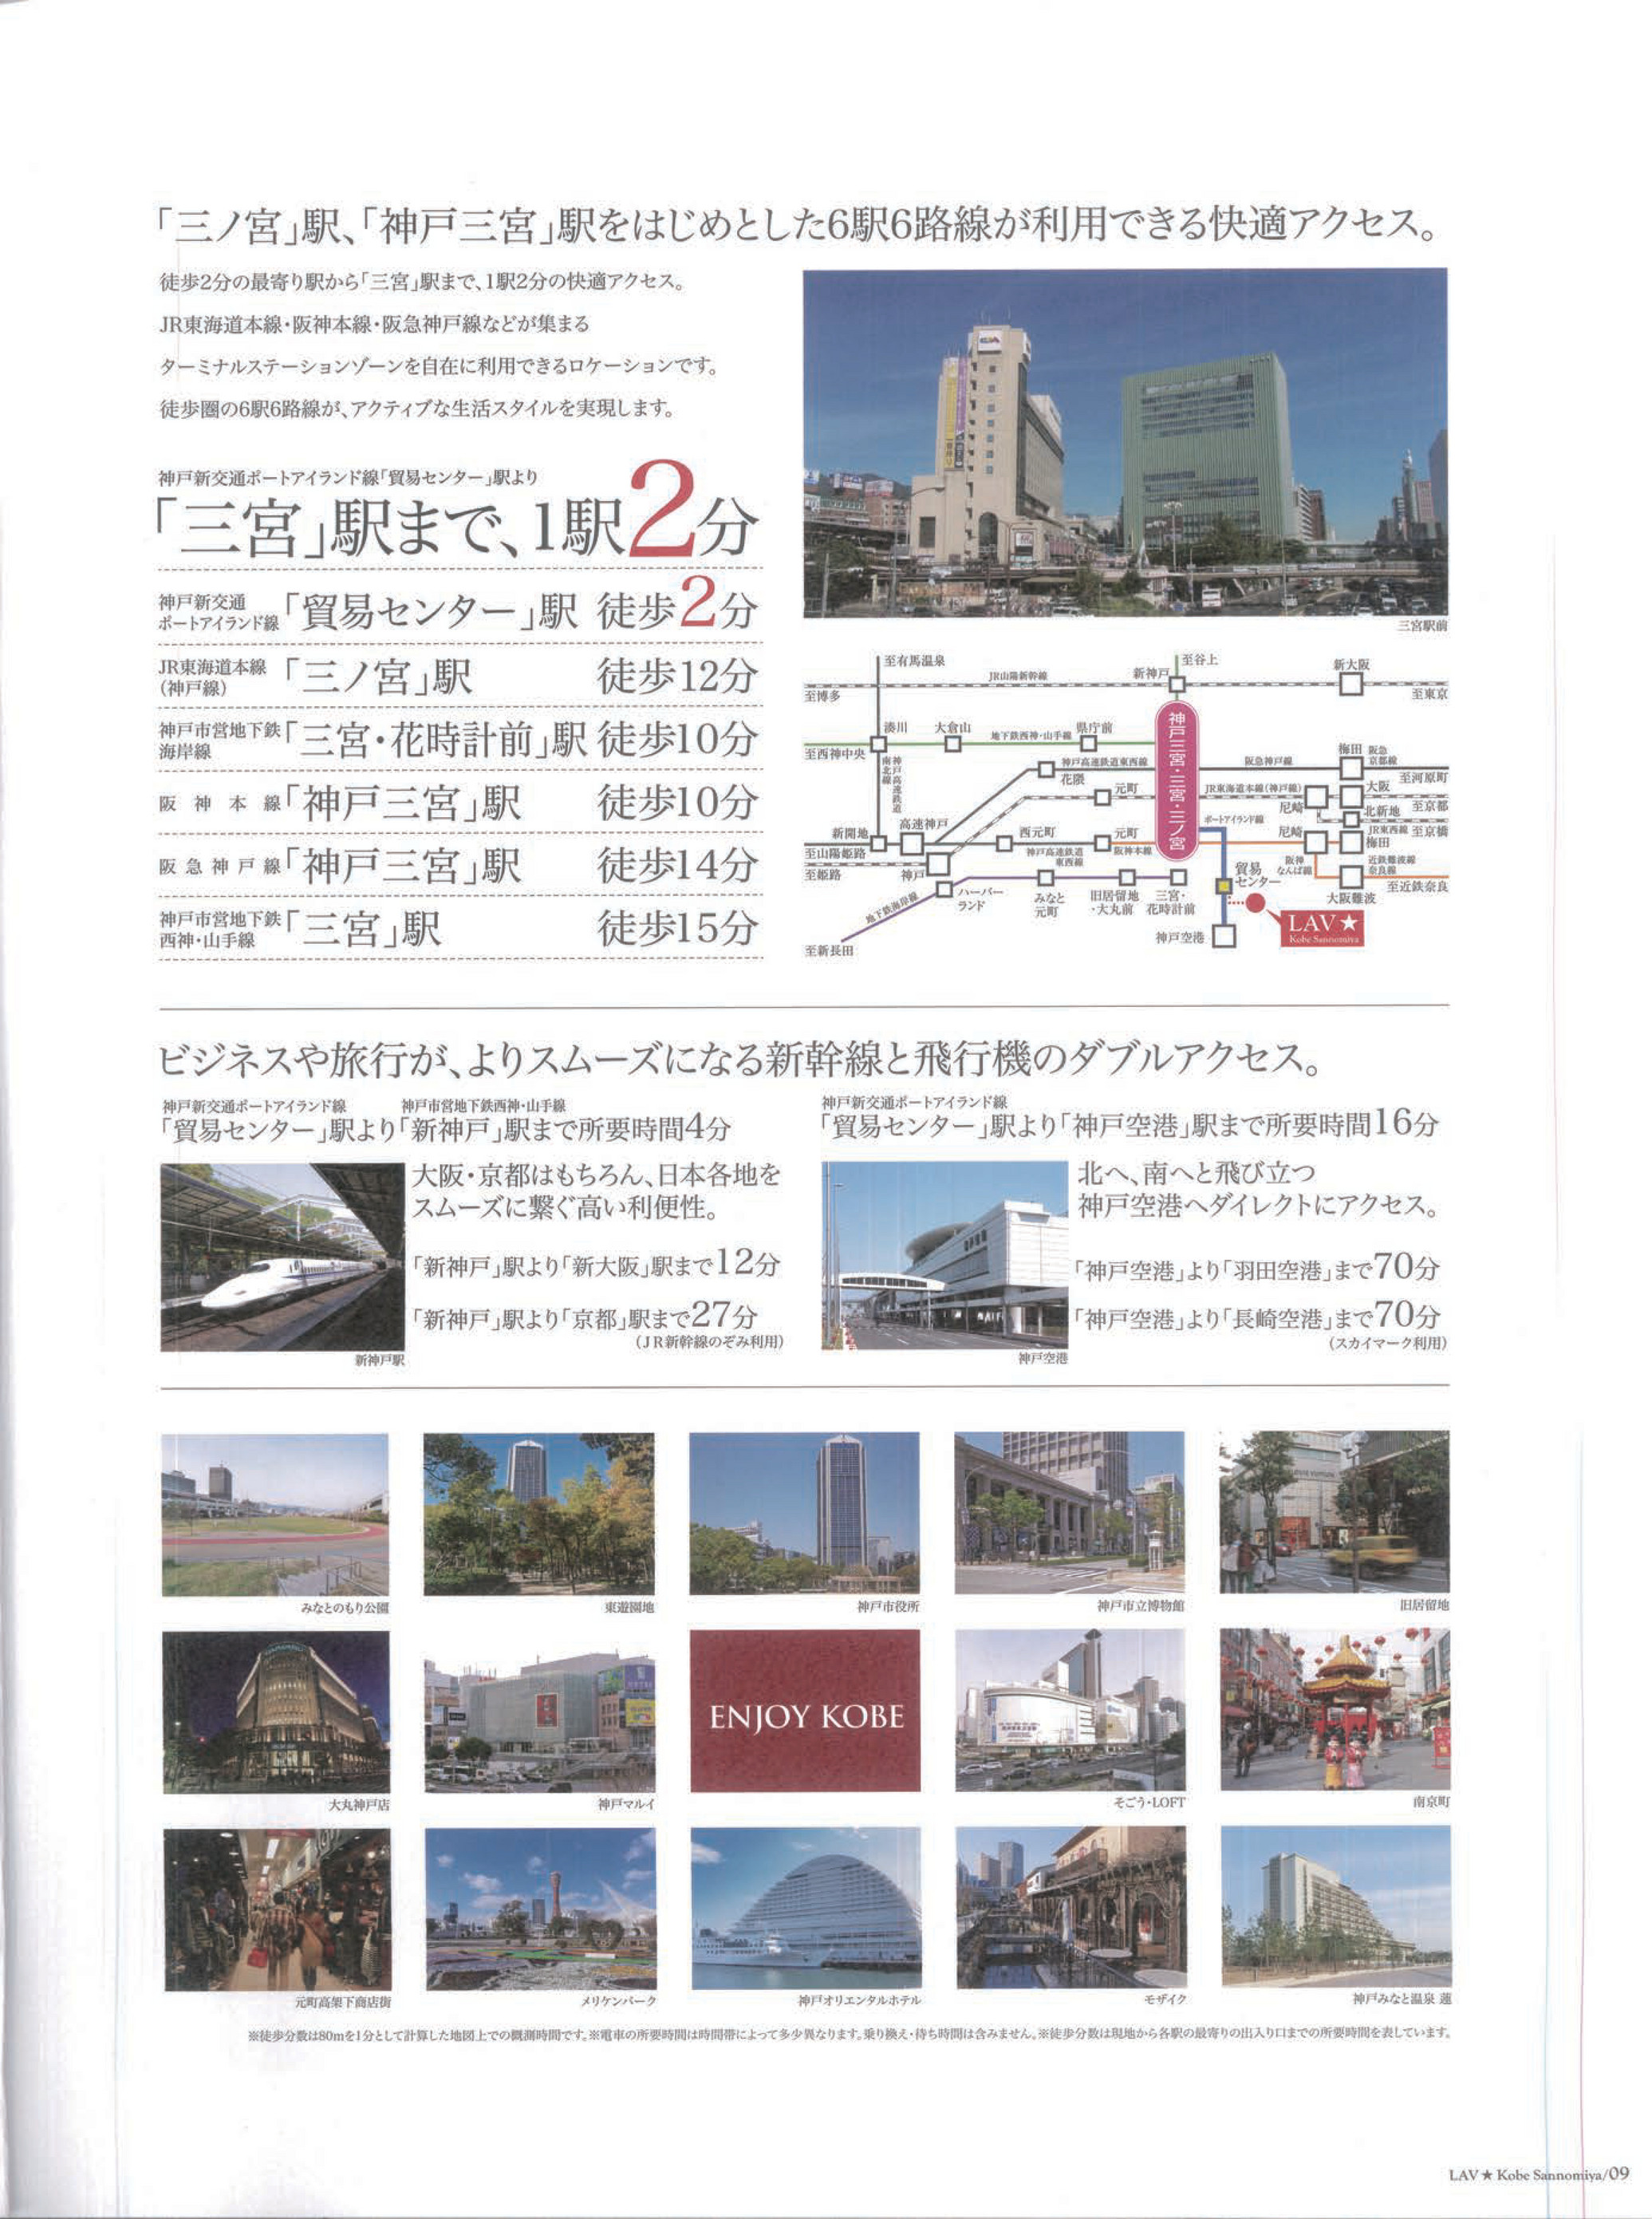 Real Estate Lav 神戸三宮 Page 26 27 Created With Publitas Com